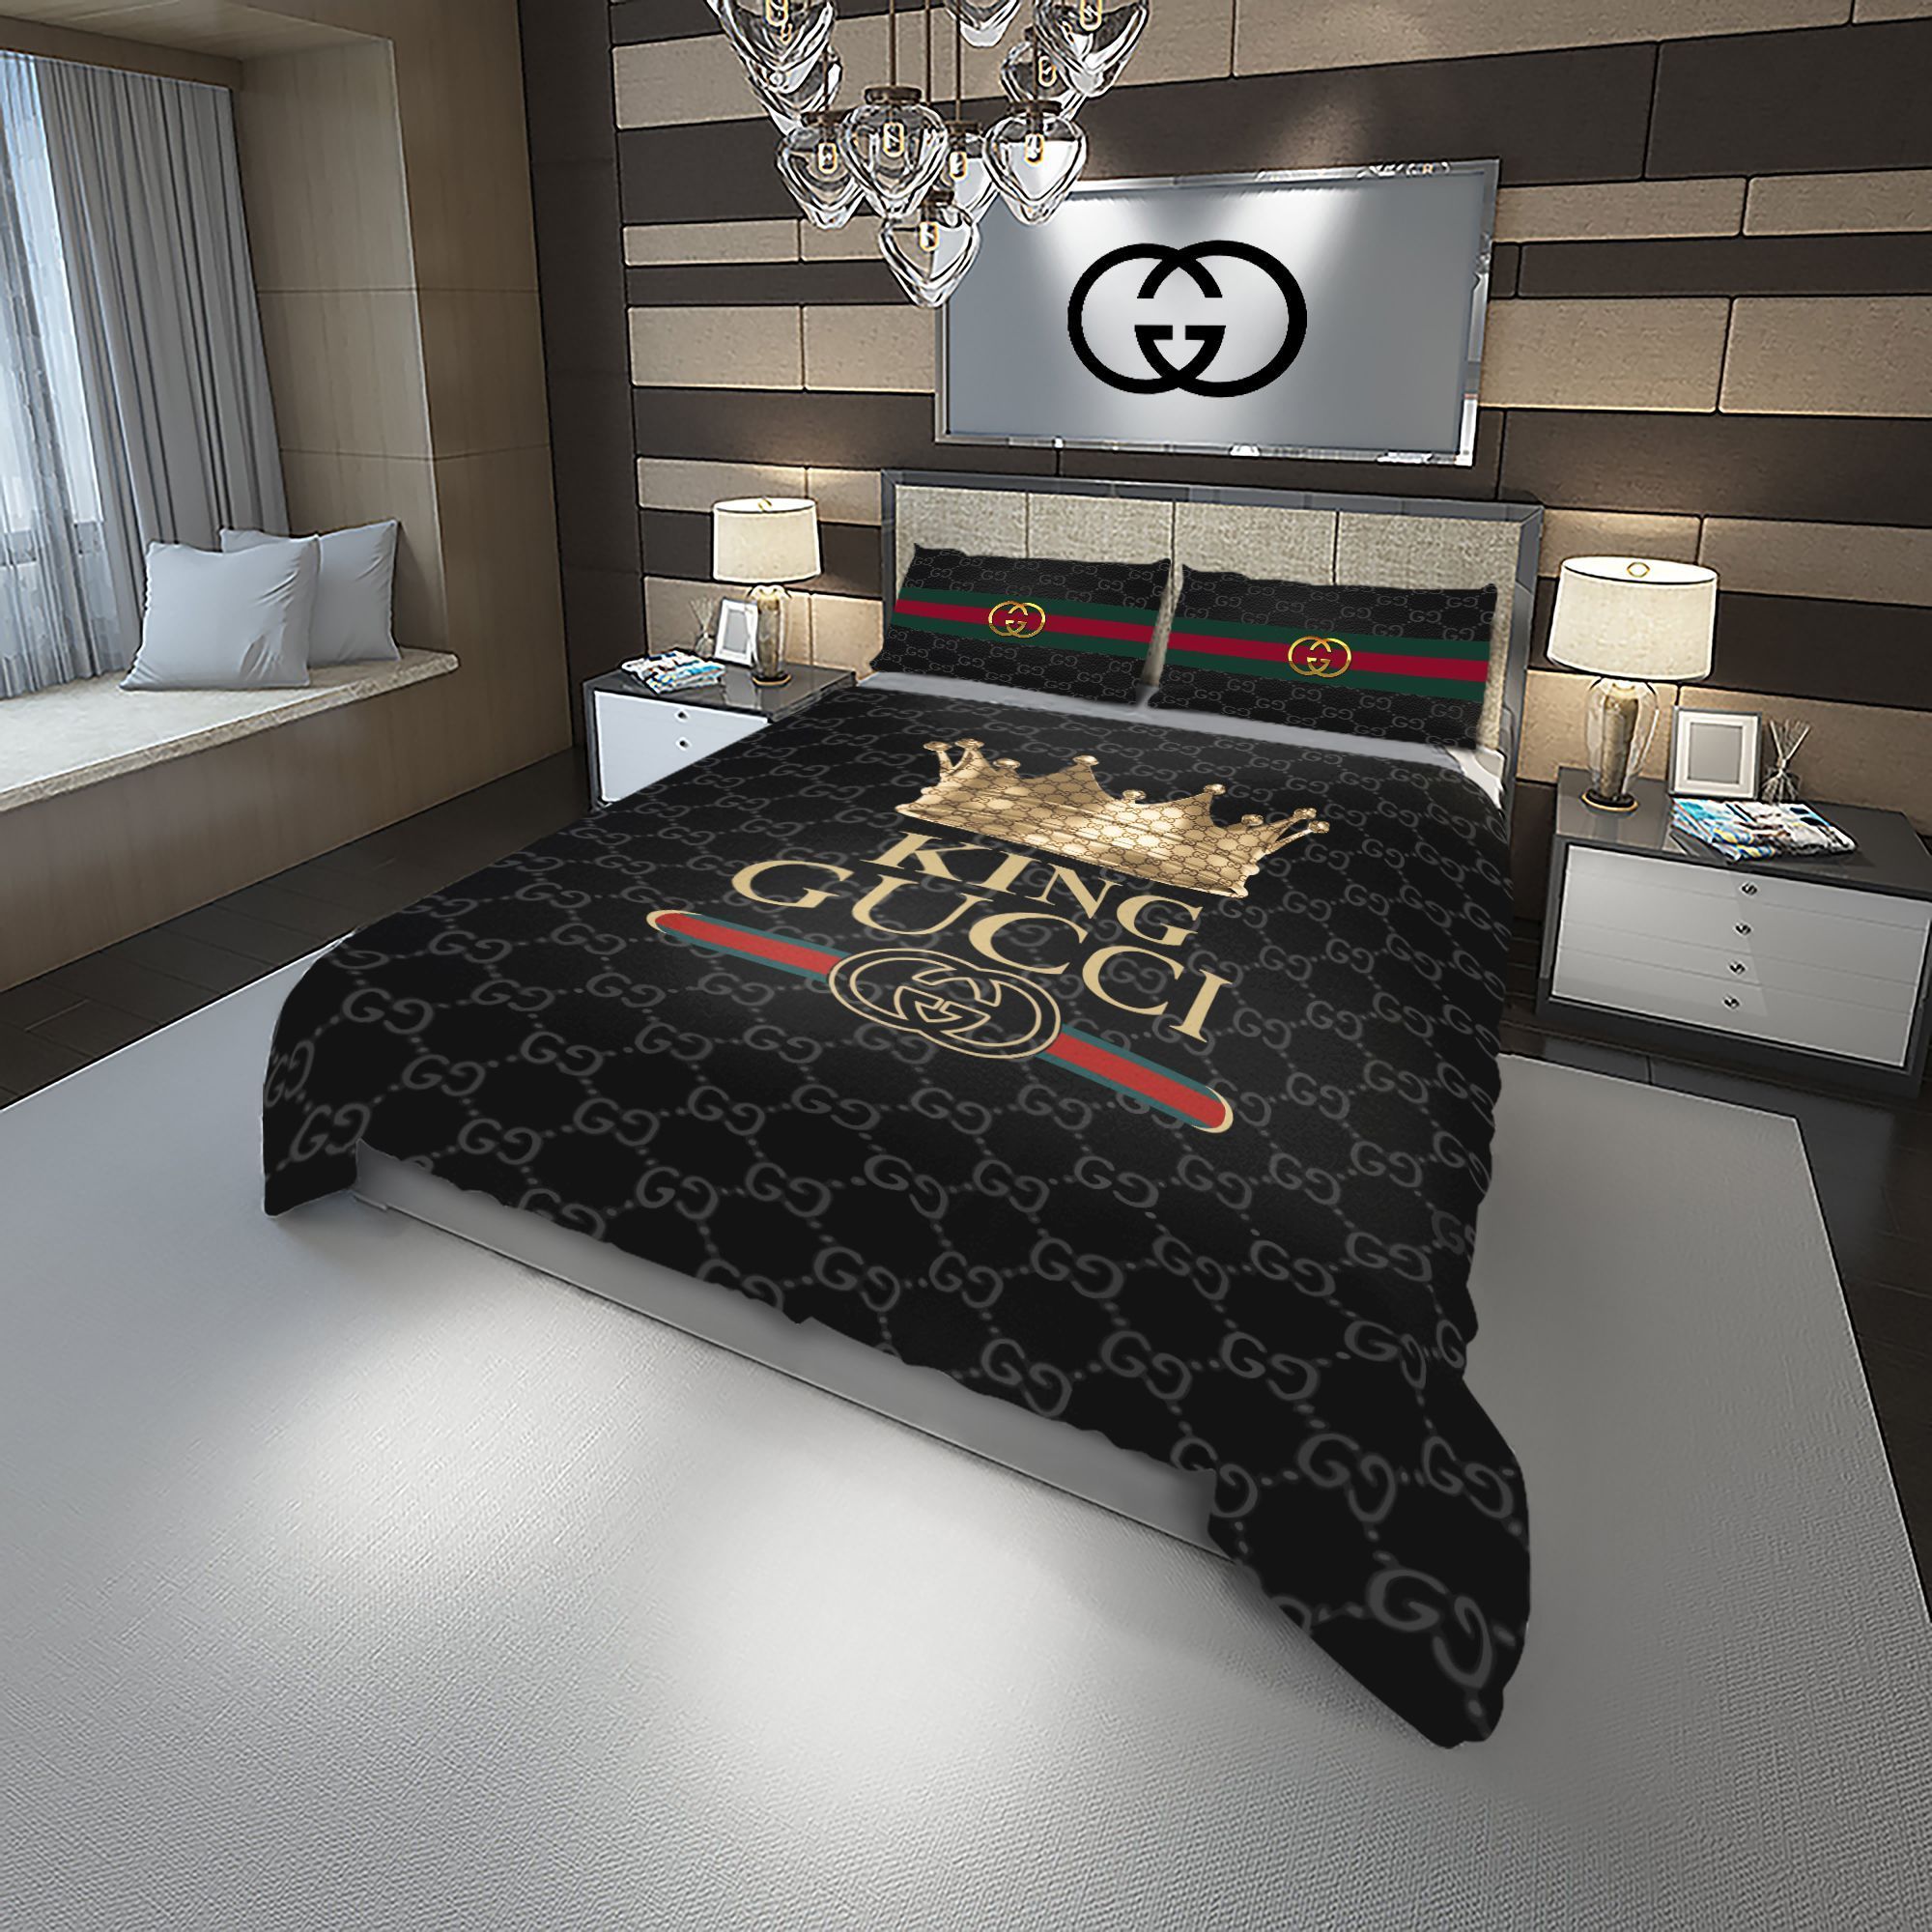 Let me show you about some luxury brand bedding set 2022 153